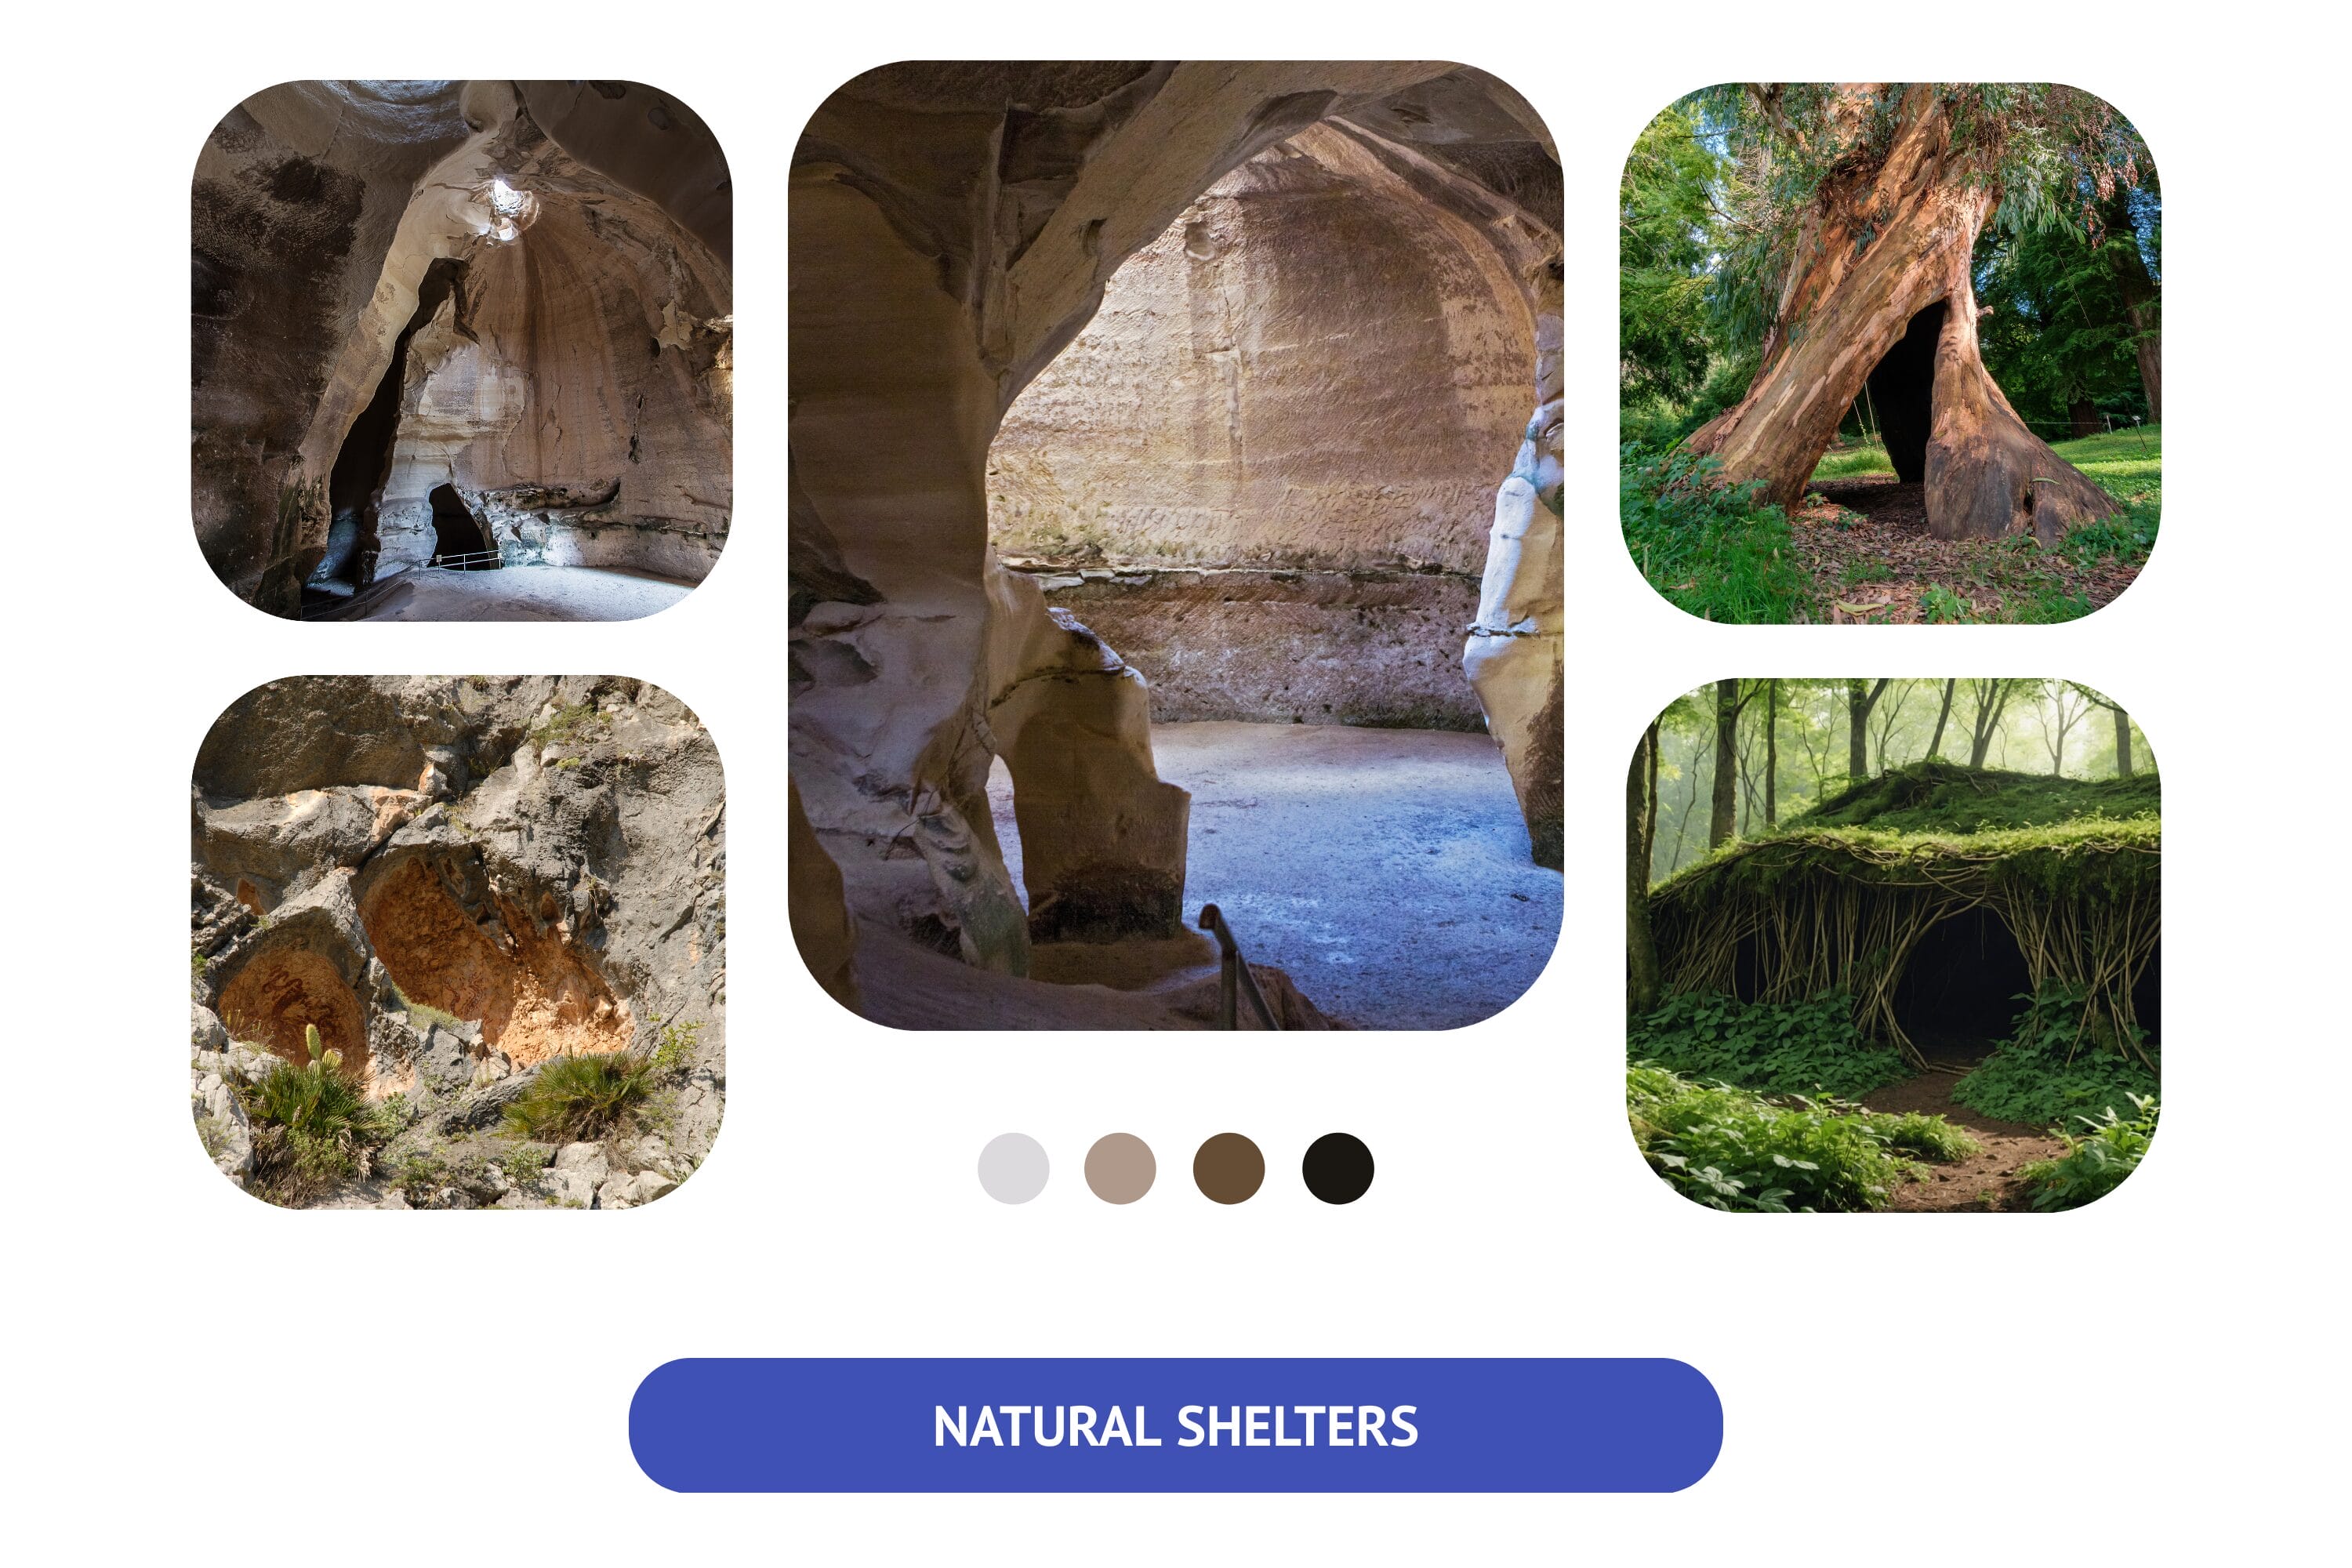 Shelters in Nature